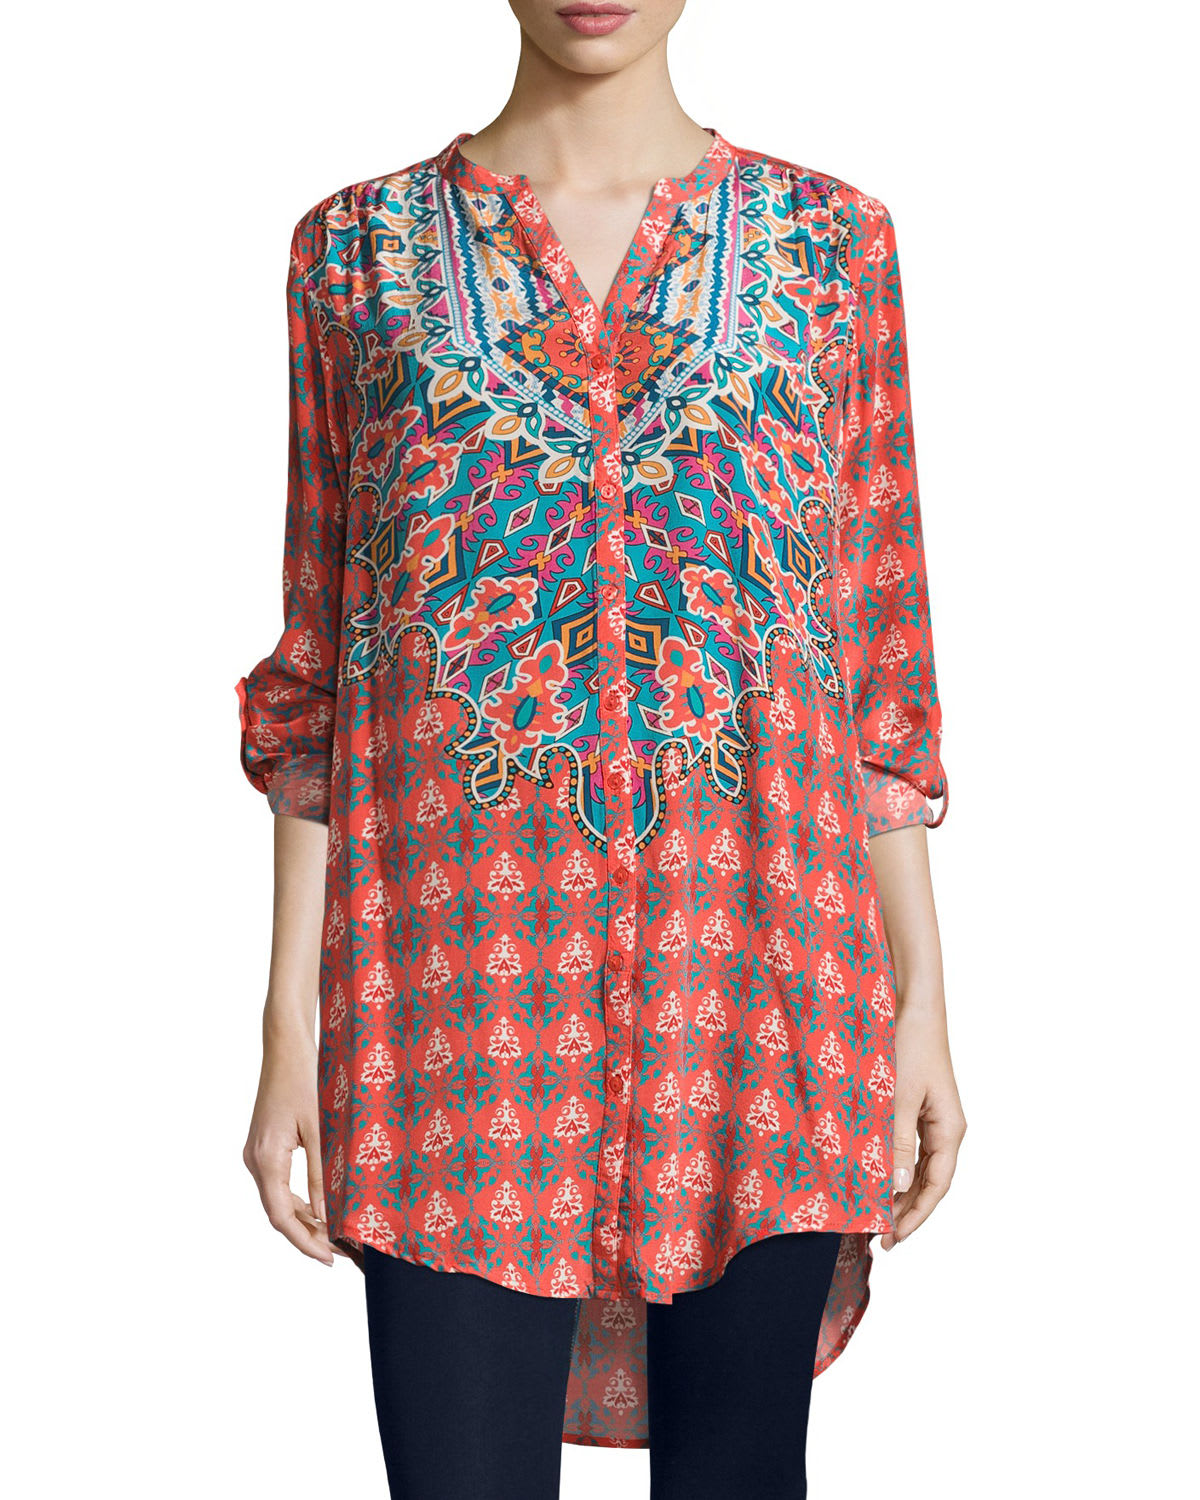 Floral Print Tunic